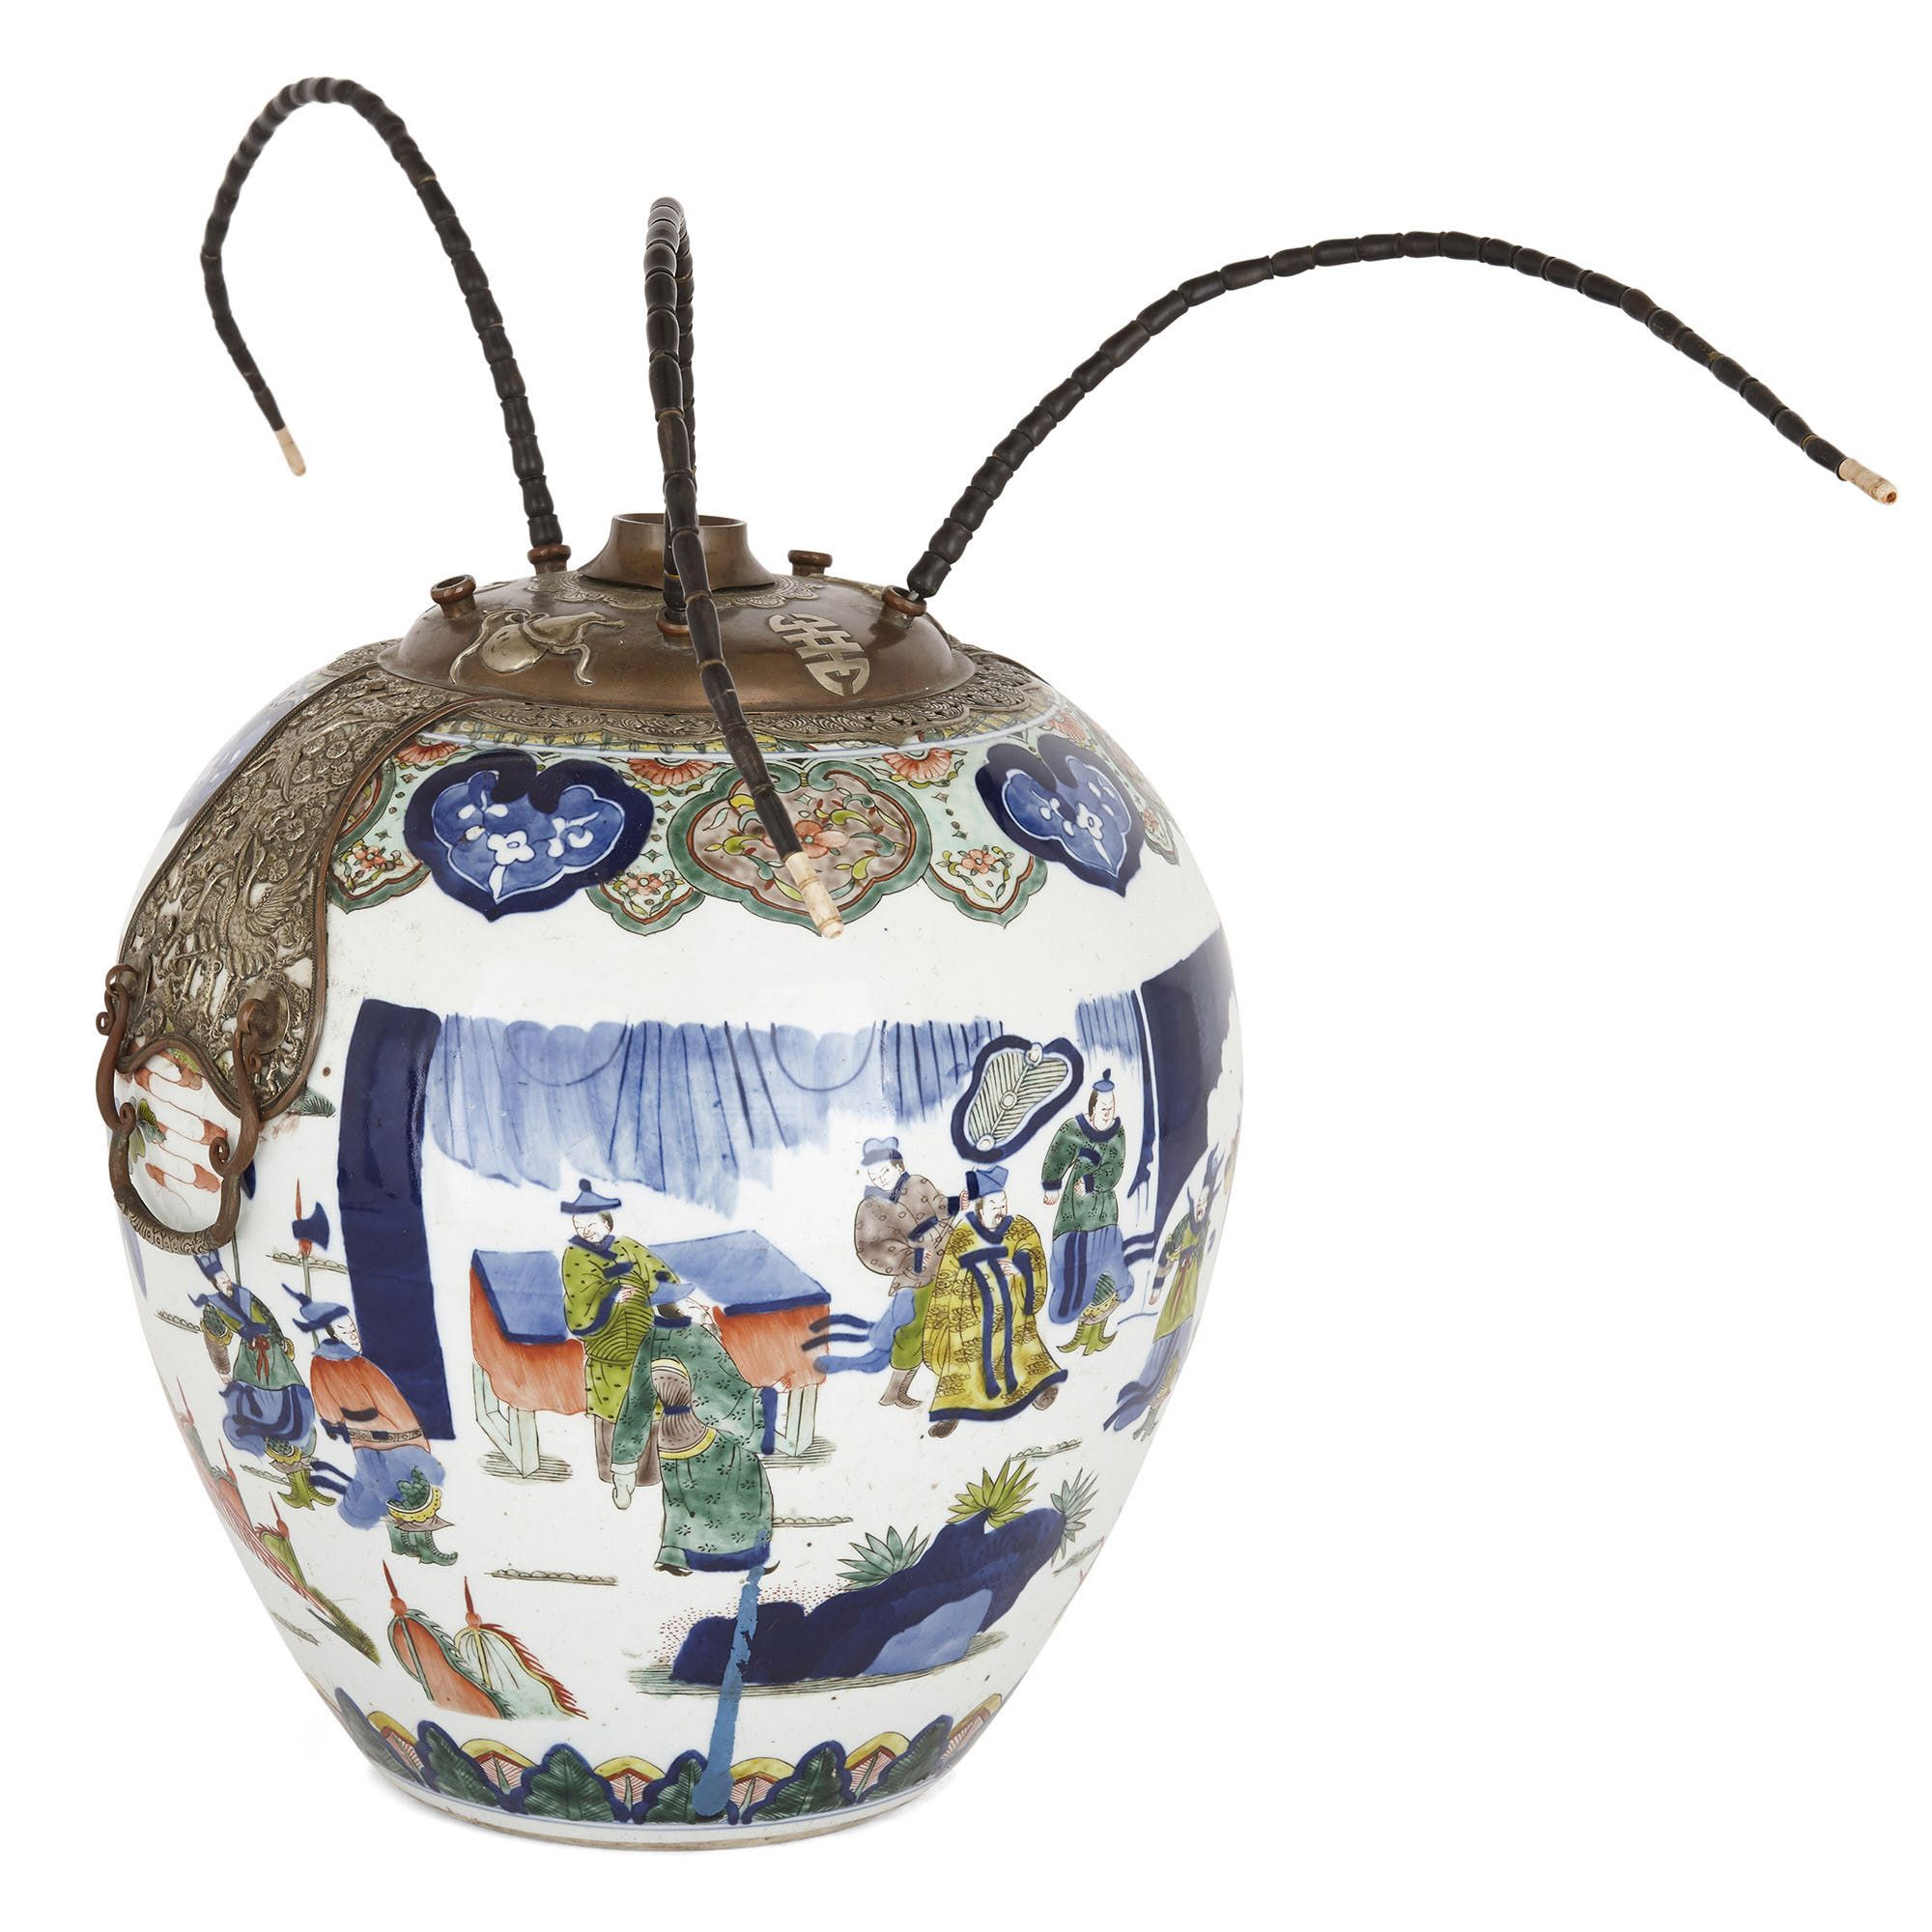 Chinese porcelain opium vase in the 17th Century Wucai style